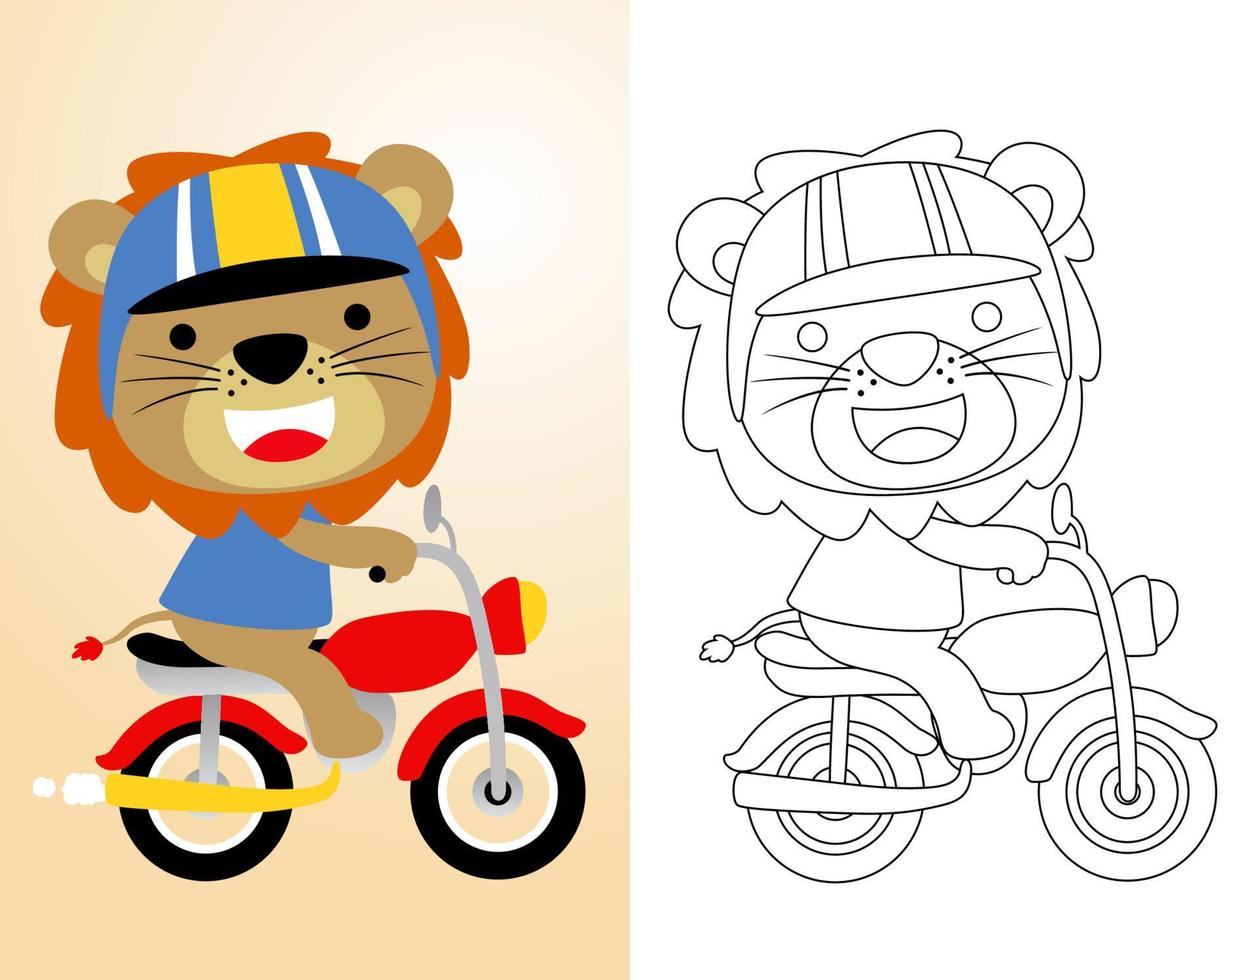 Coloring book or page with cute lion cartoon wearing helmet riding motorcycle vector